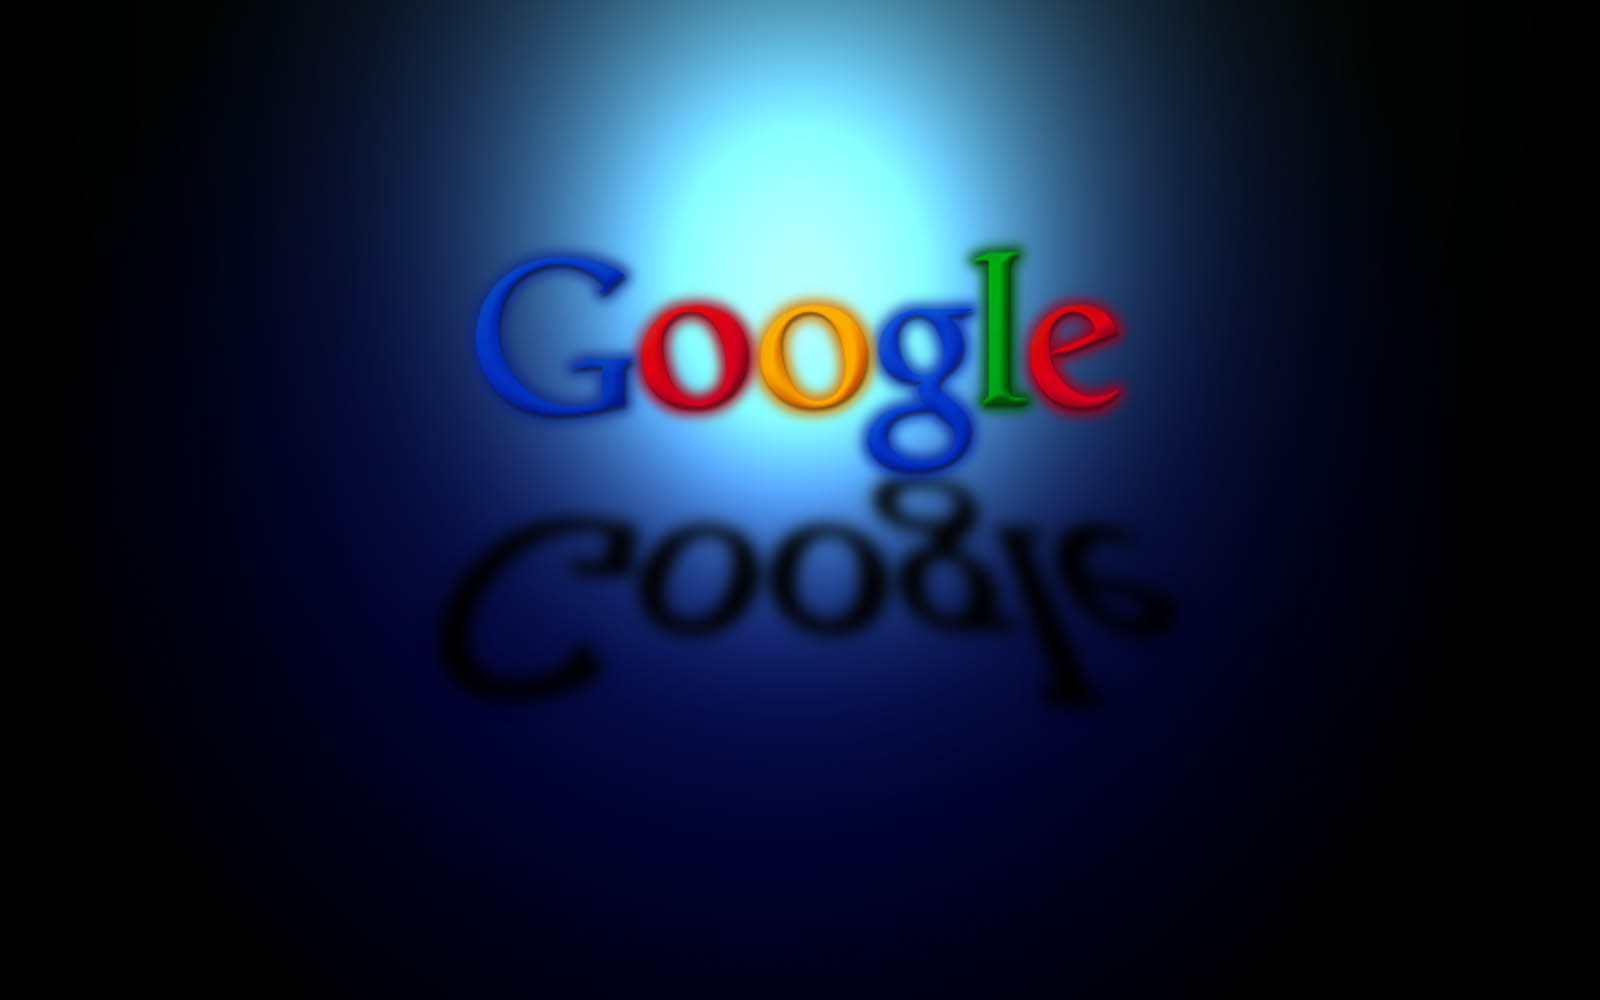 Tag Google Wallpaper Background Photos Image And Pictures For